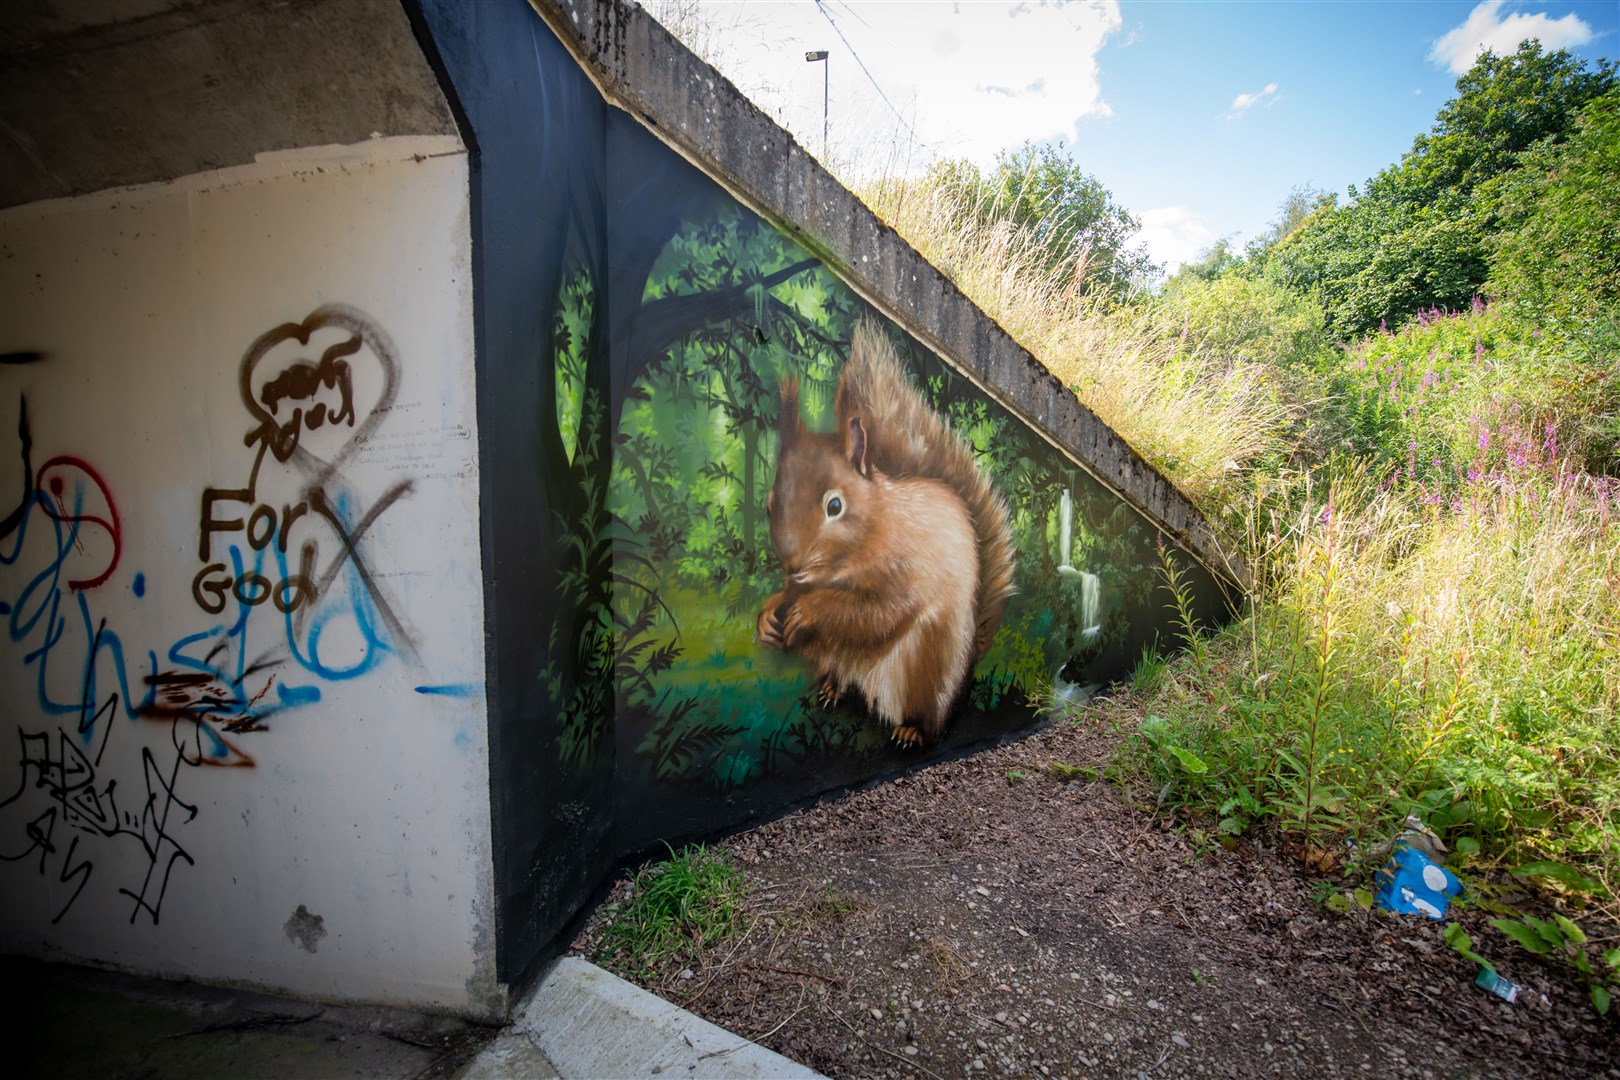 A squirrel next to soon to be covered graffiti